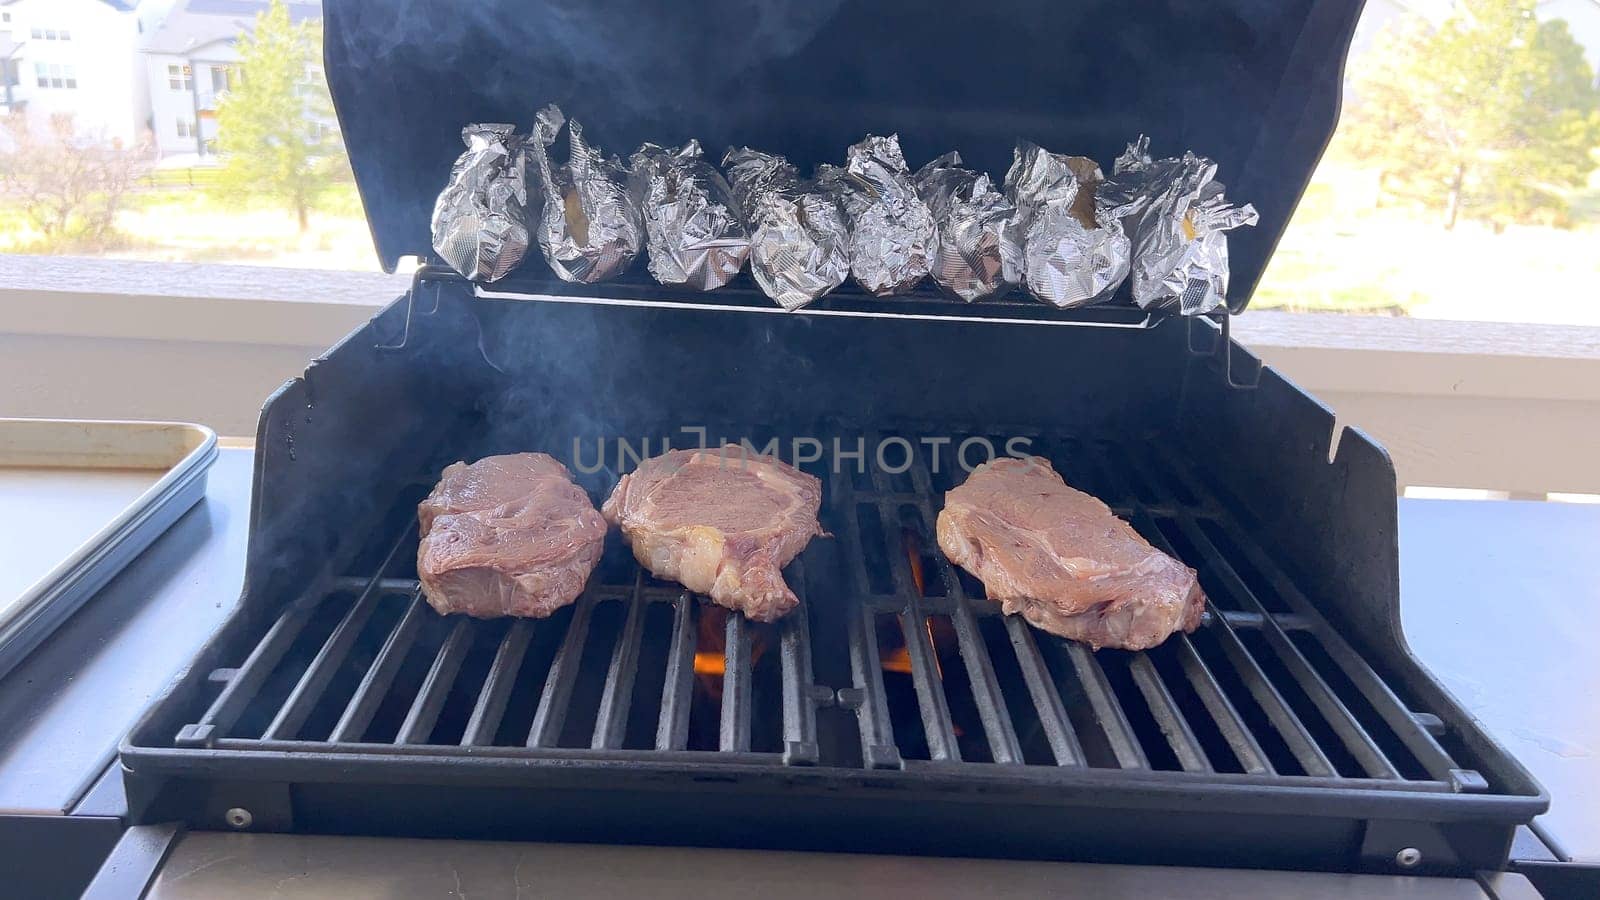 A person uses tongs to flip juicy steaks on a grill, with flames licking the meat, captured in a moment of intense heat and sizzle, showcasing a classic outdoor cooking experience.